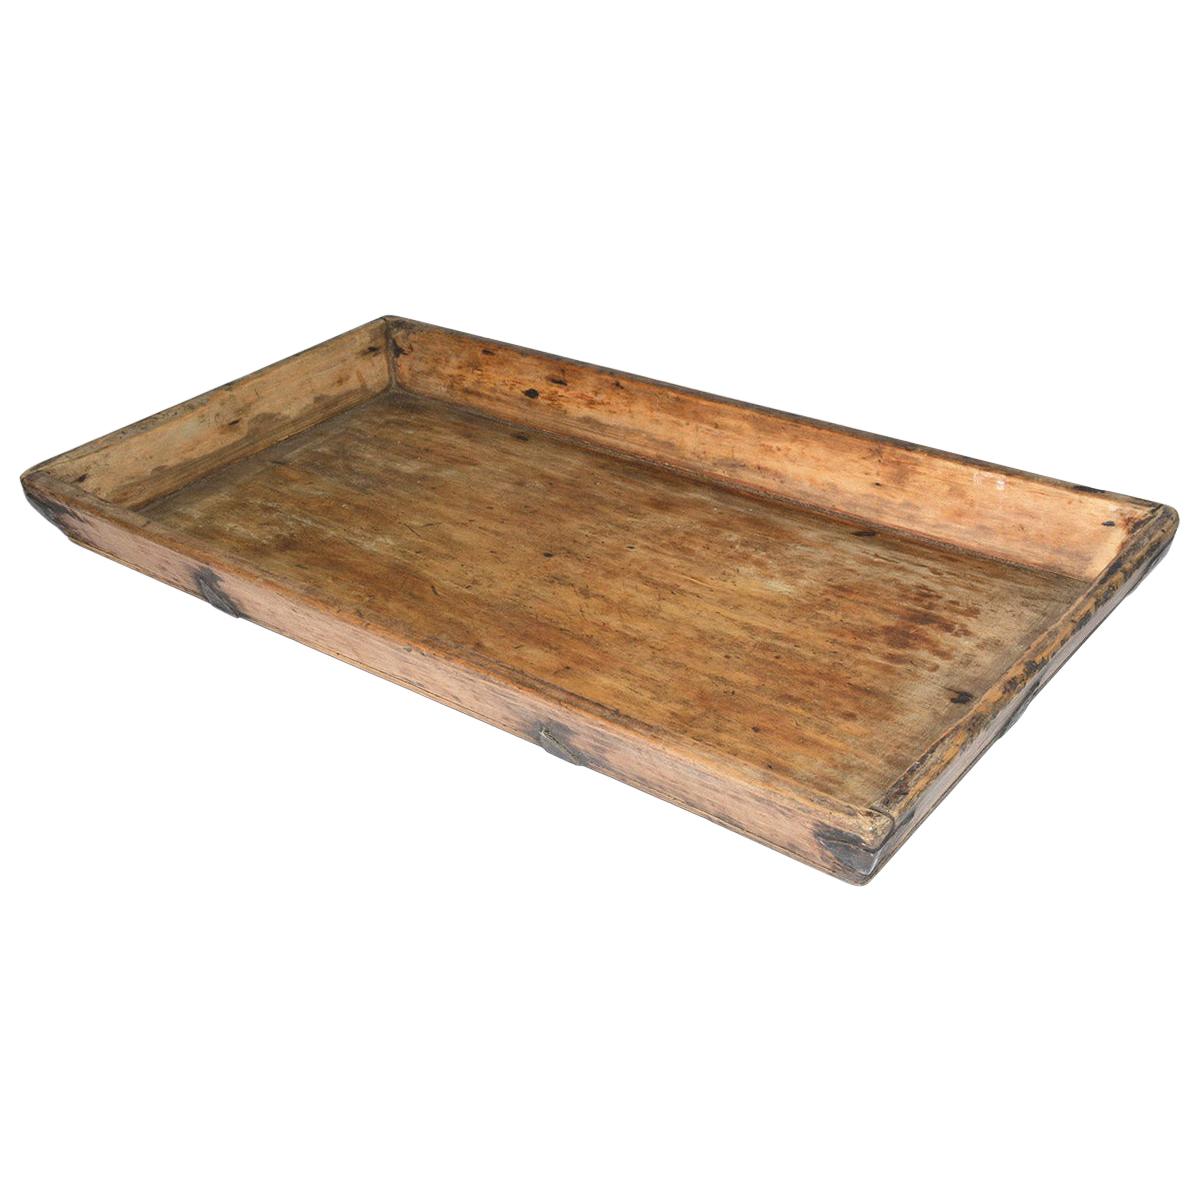 Rustic Provincial Style Chinese Tea Tray